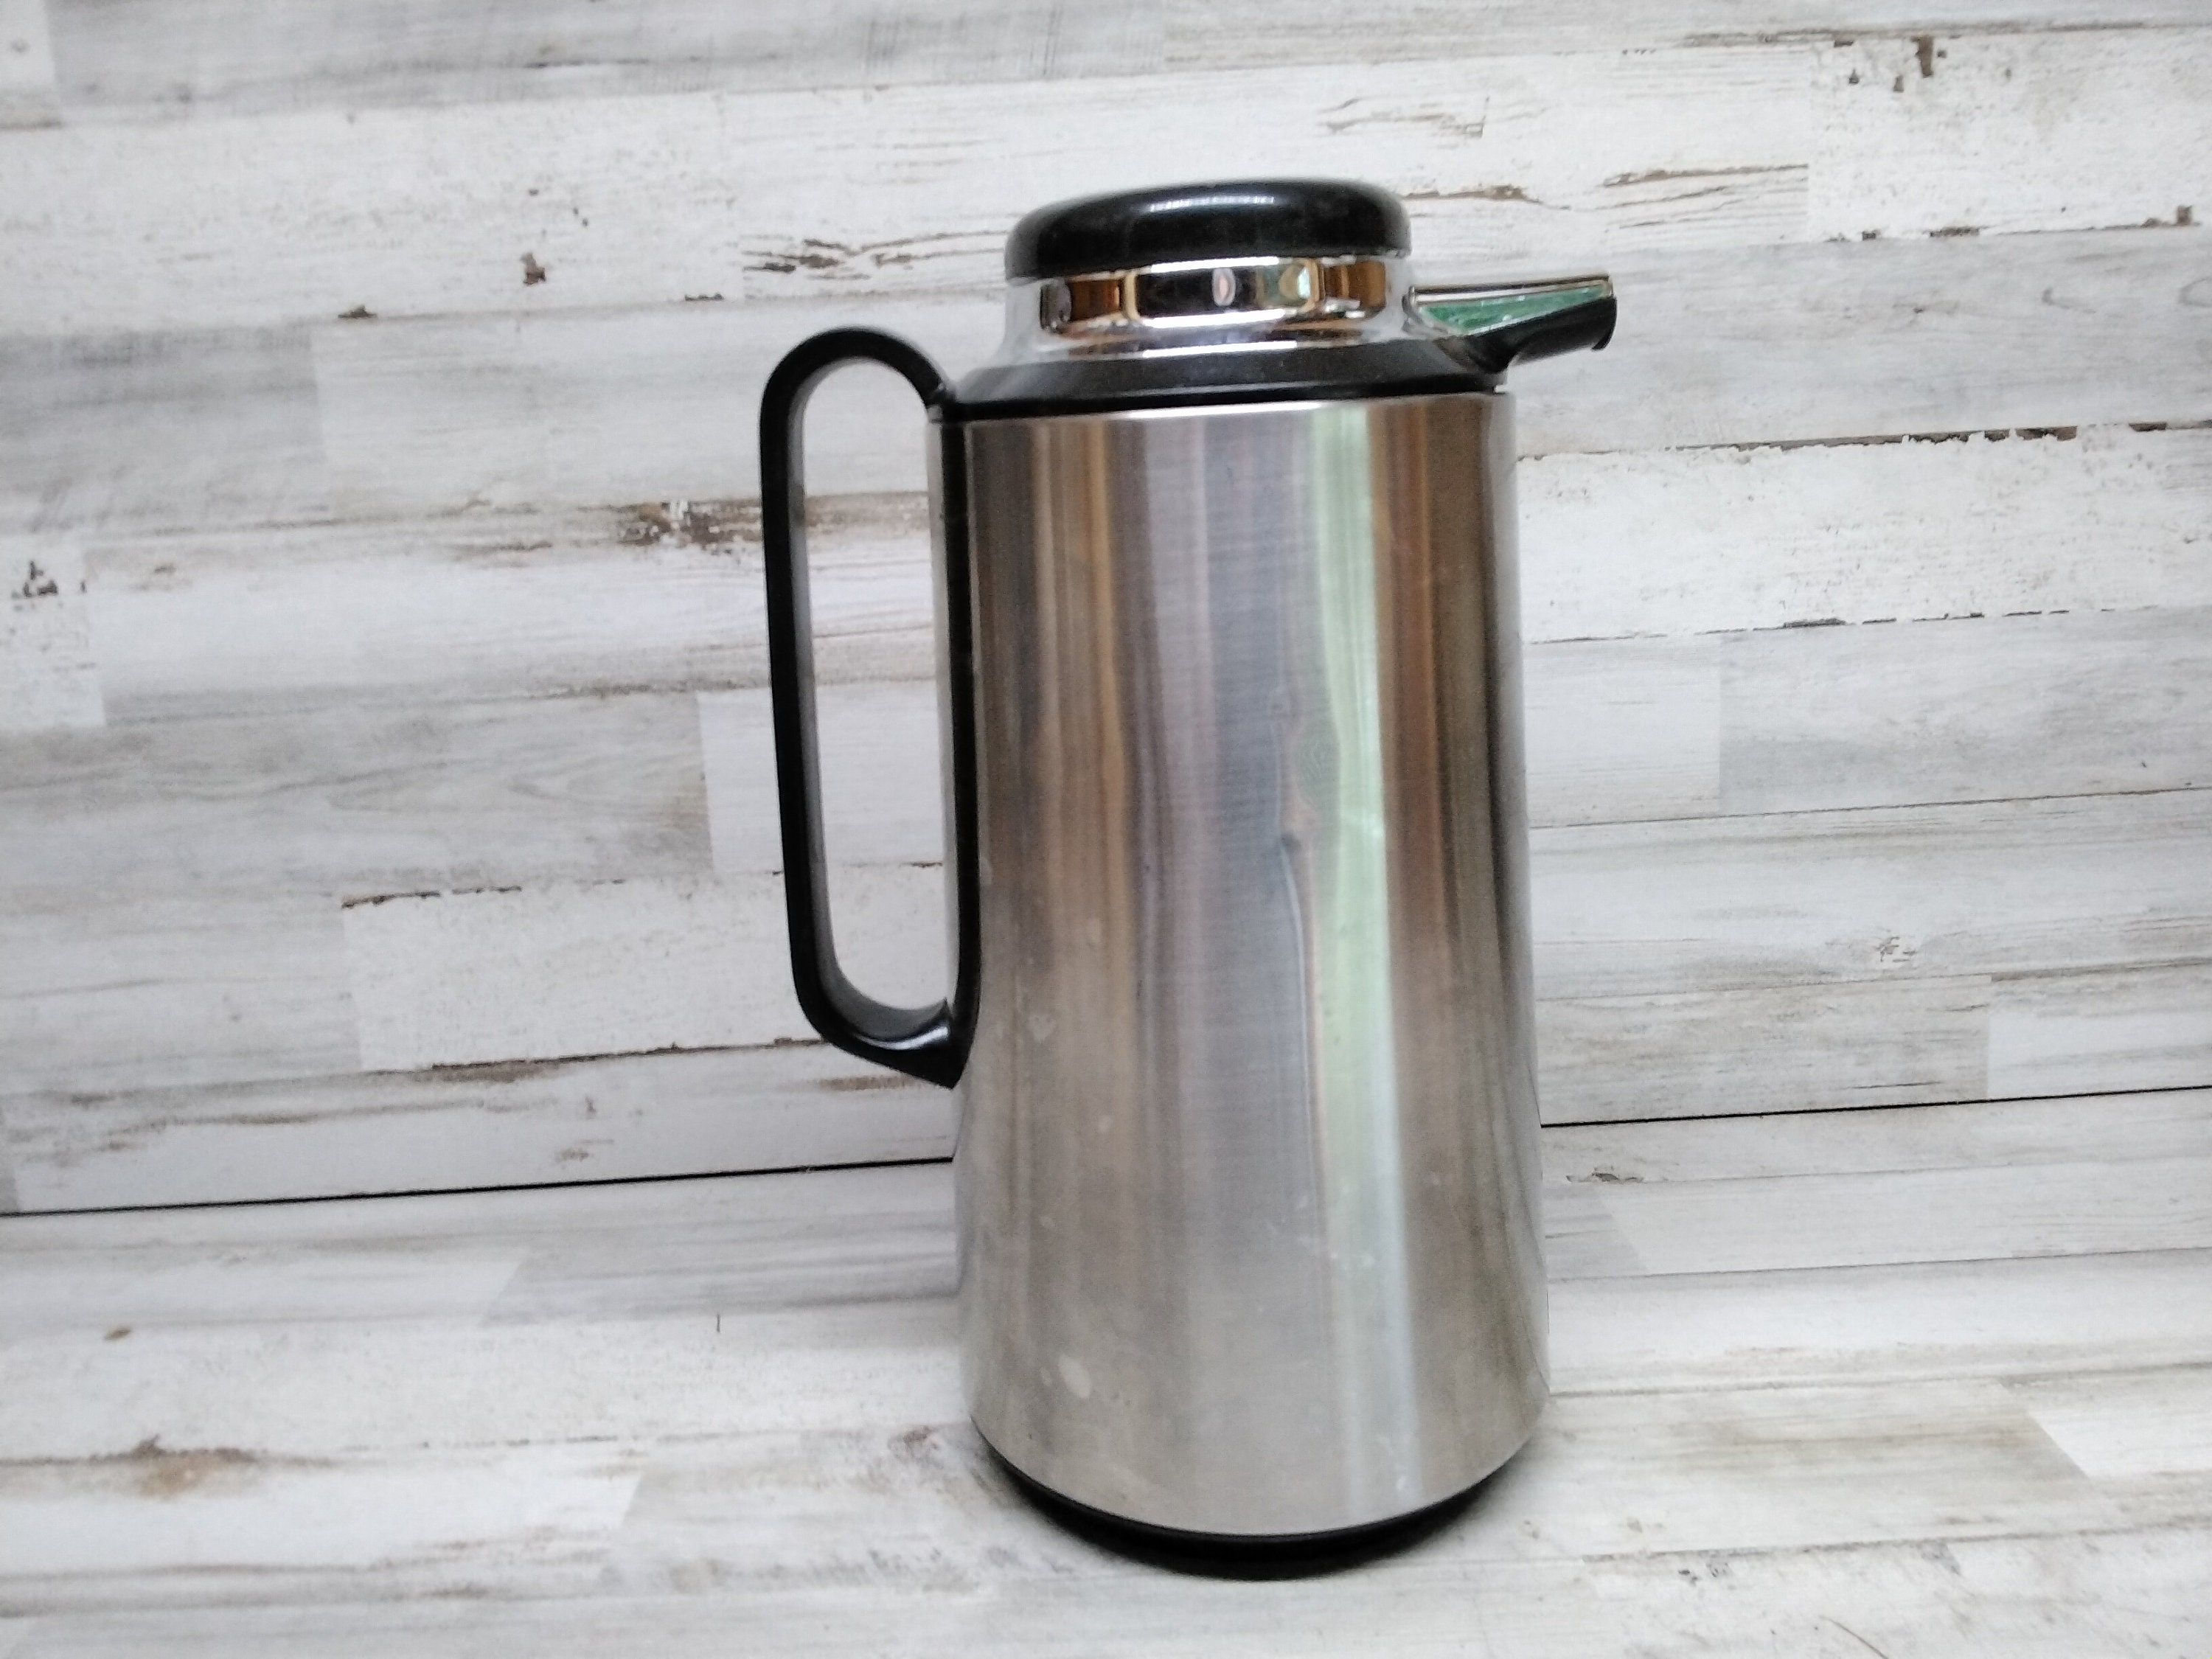 1 Quart Thermos Carafe Coffee Thermique Callaway Ivy Swirl Corning